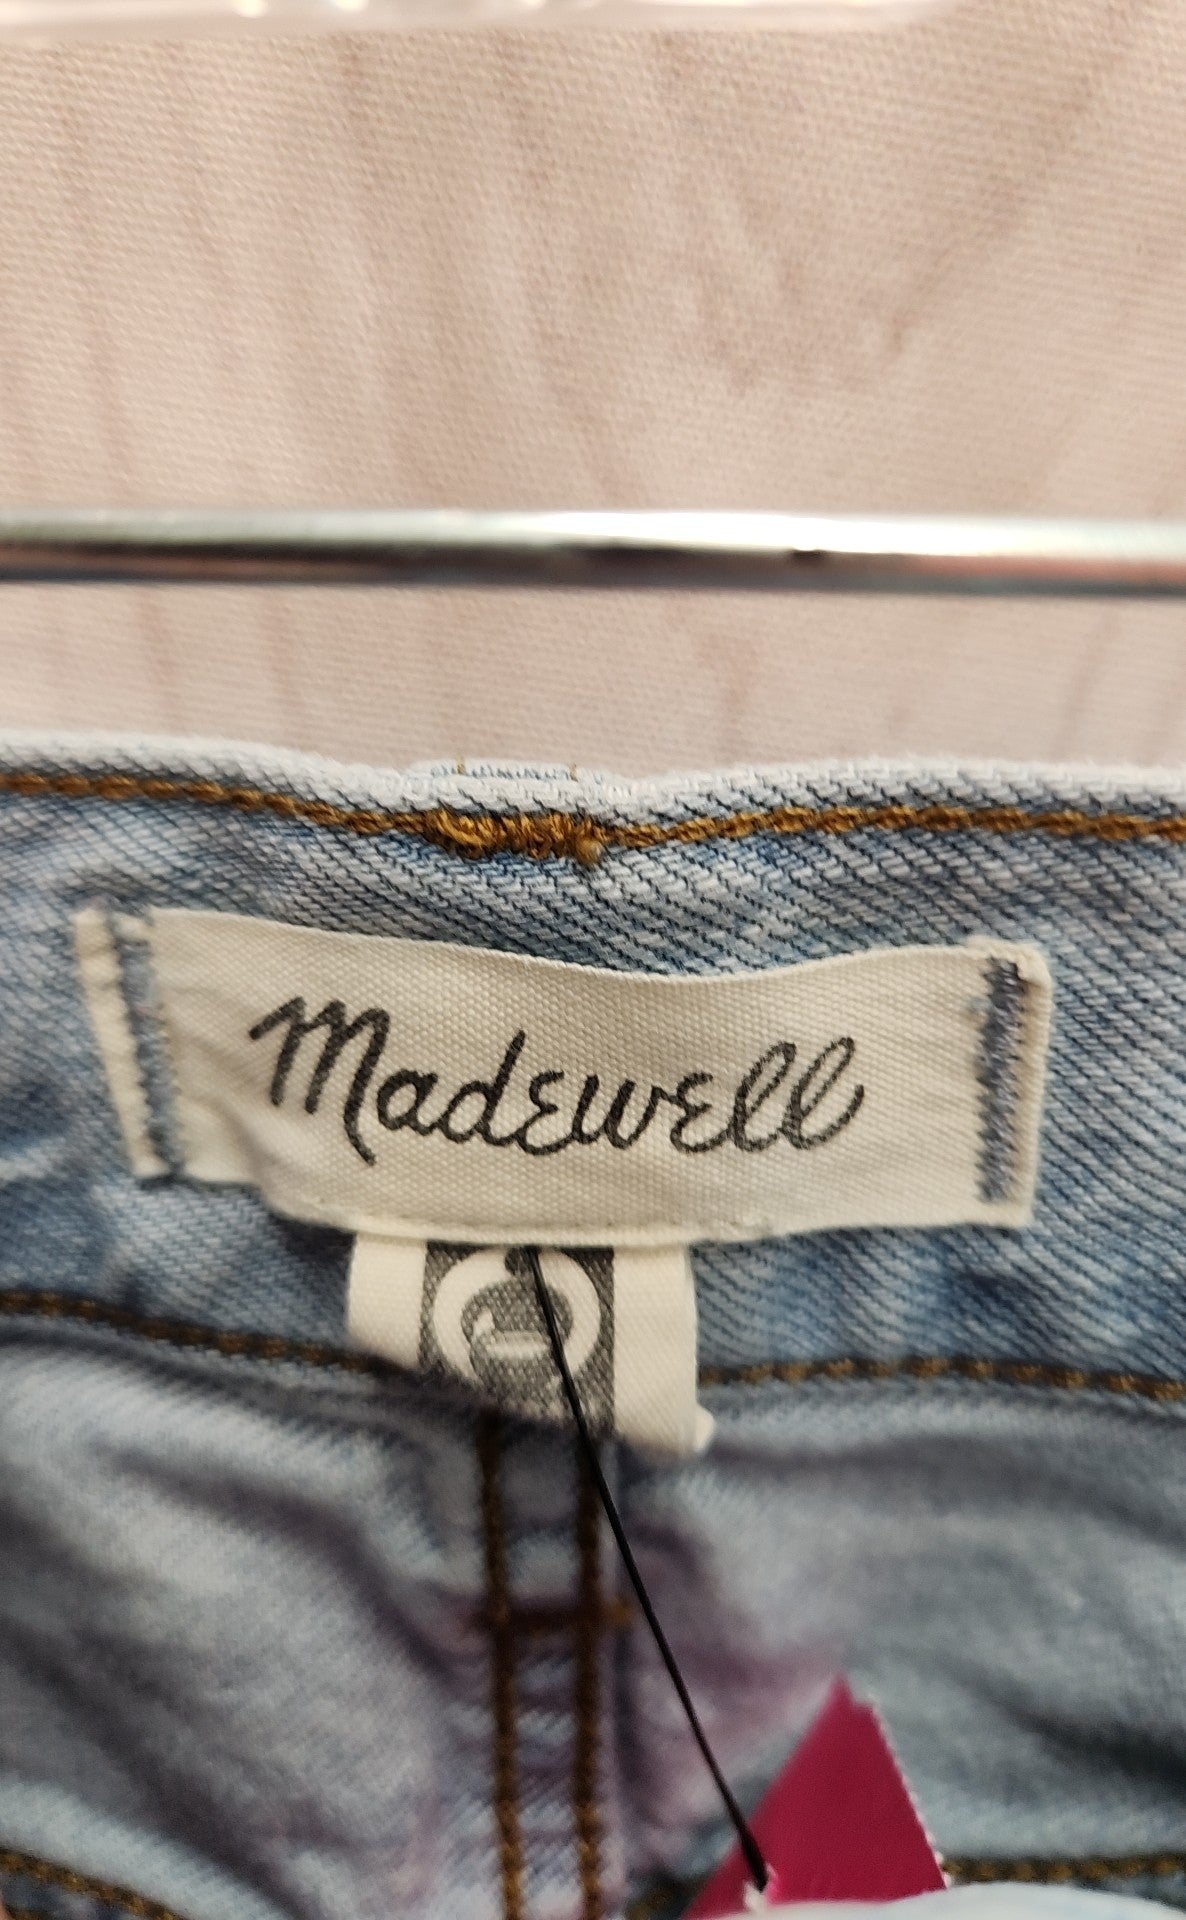 Madewell Women's Size 29 (7-8) The Perfect Vintage Jean Blue Jeans